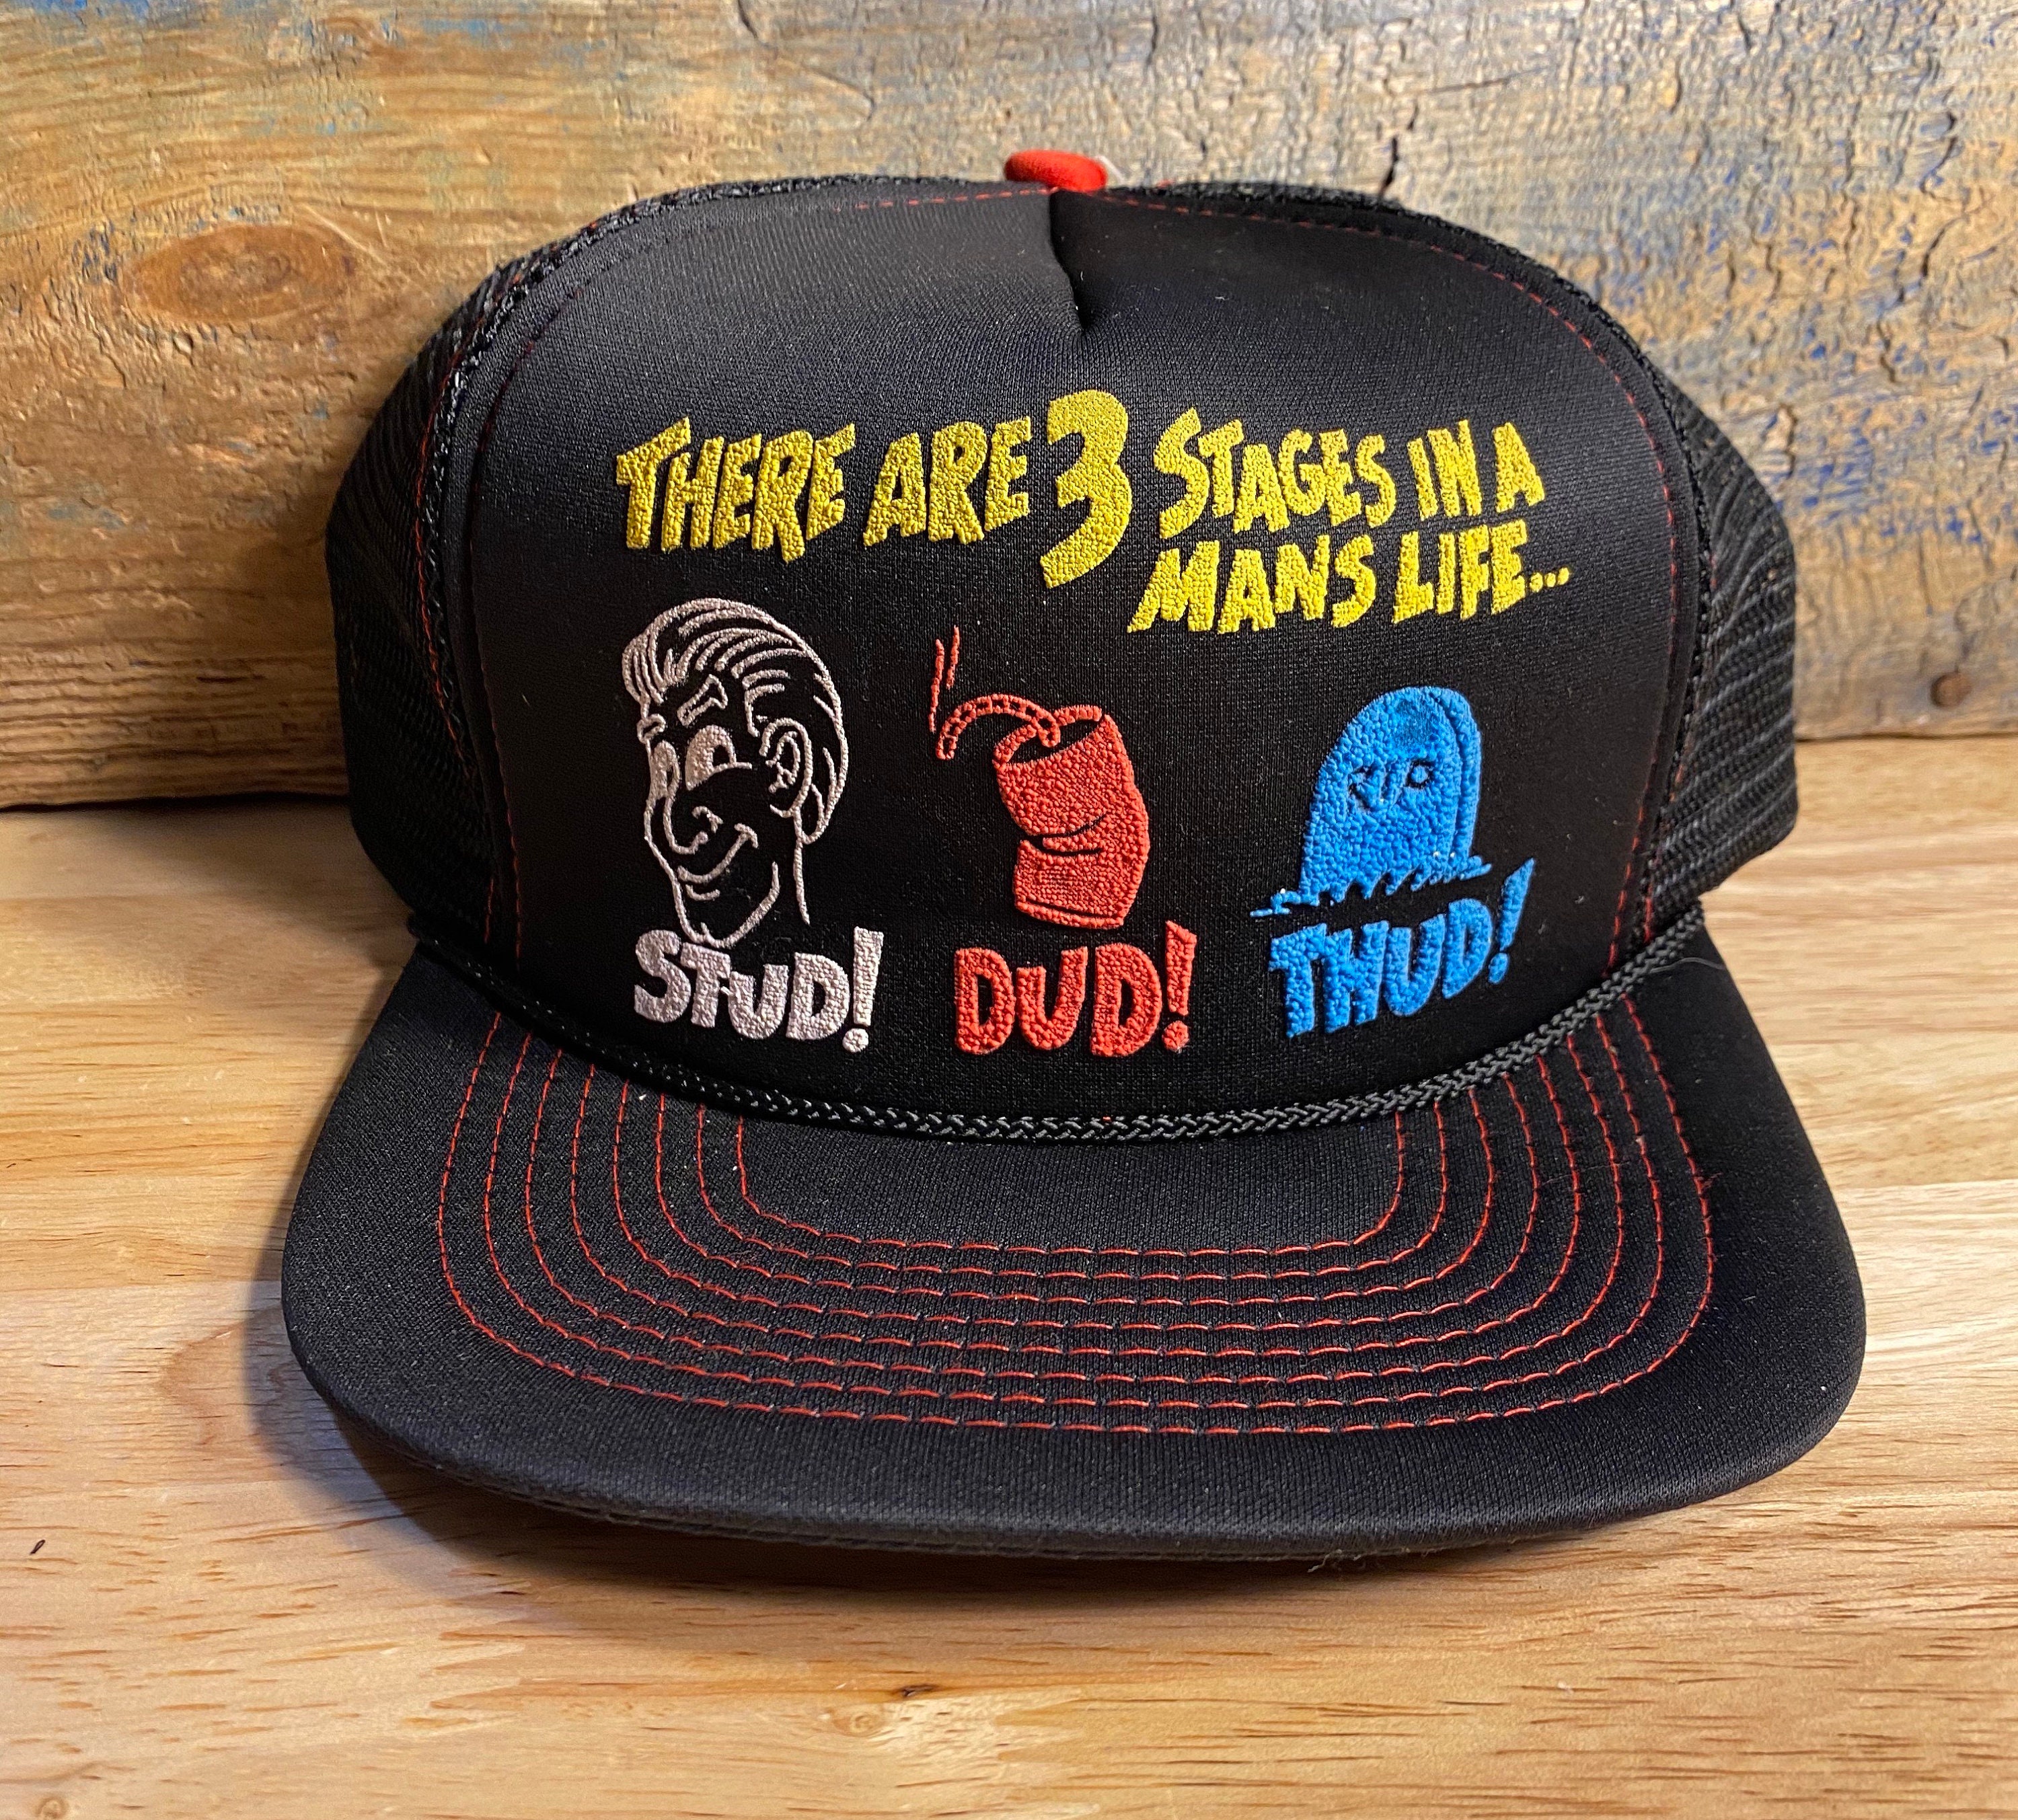 Vintage Funny Trucker Hat // There Are 3 Stages in a Mans Life Hat // Stud  Dud and Thud // Funny Mens Humor // Funny Saying Black Snapback -  New  Zealand